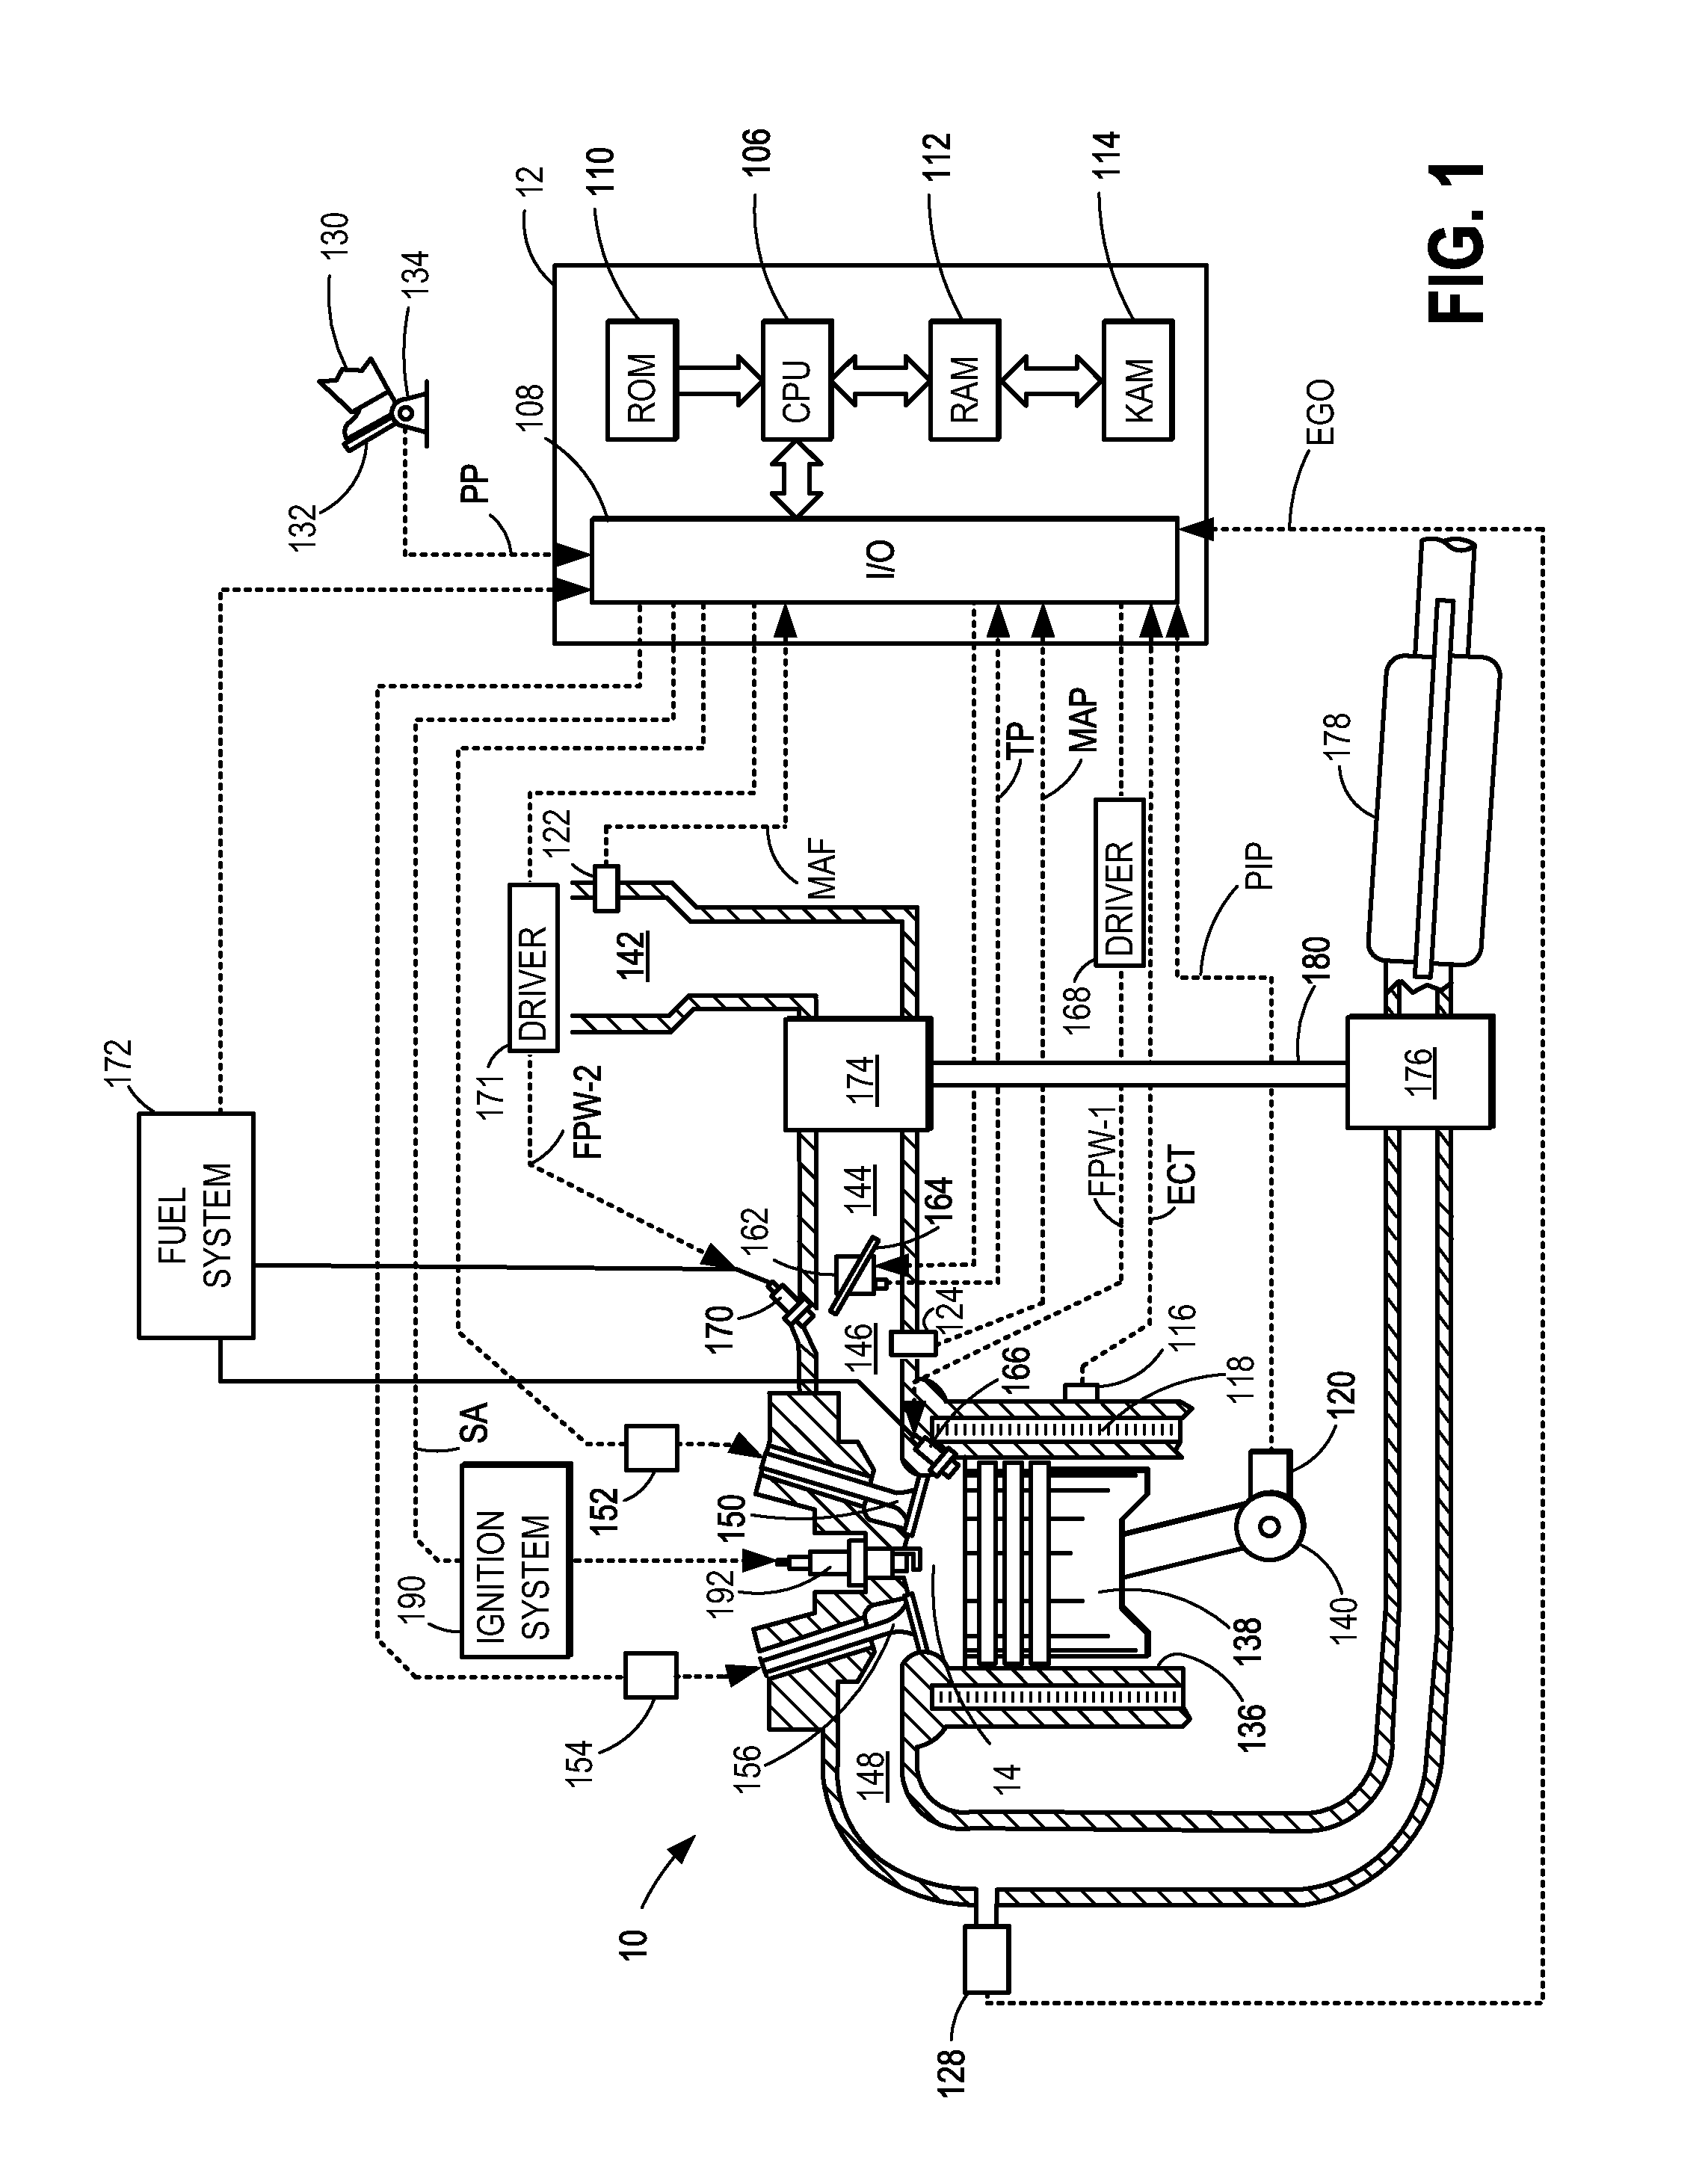 Method for fuel injection control